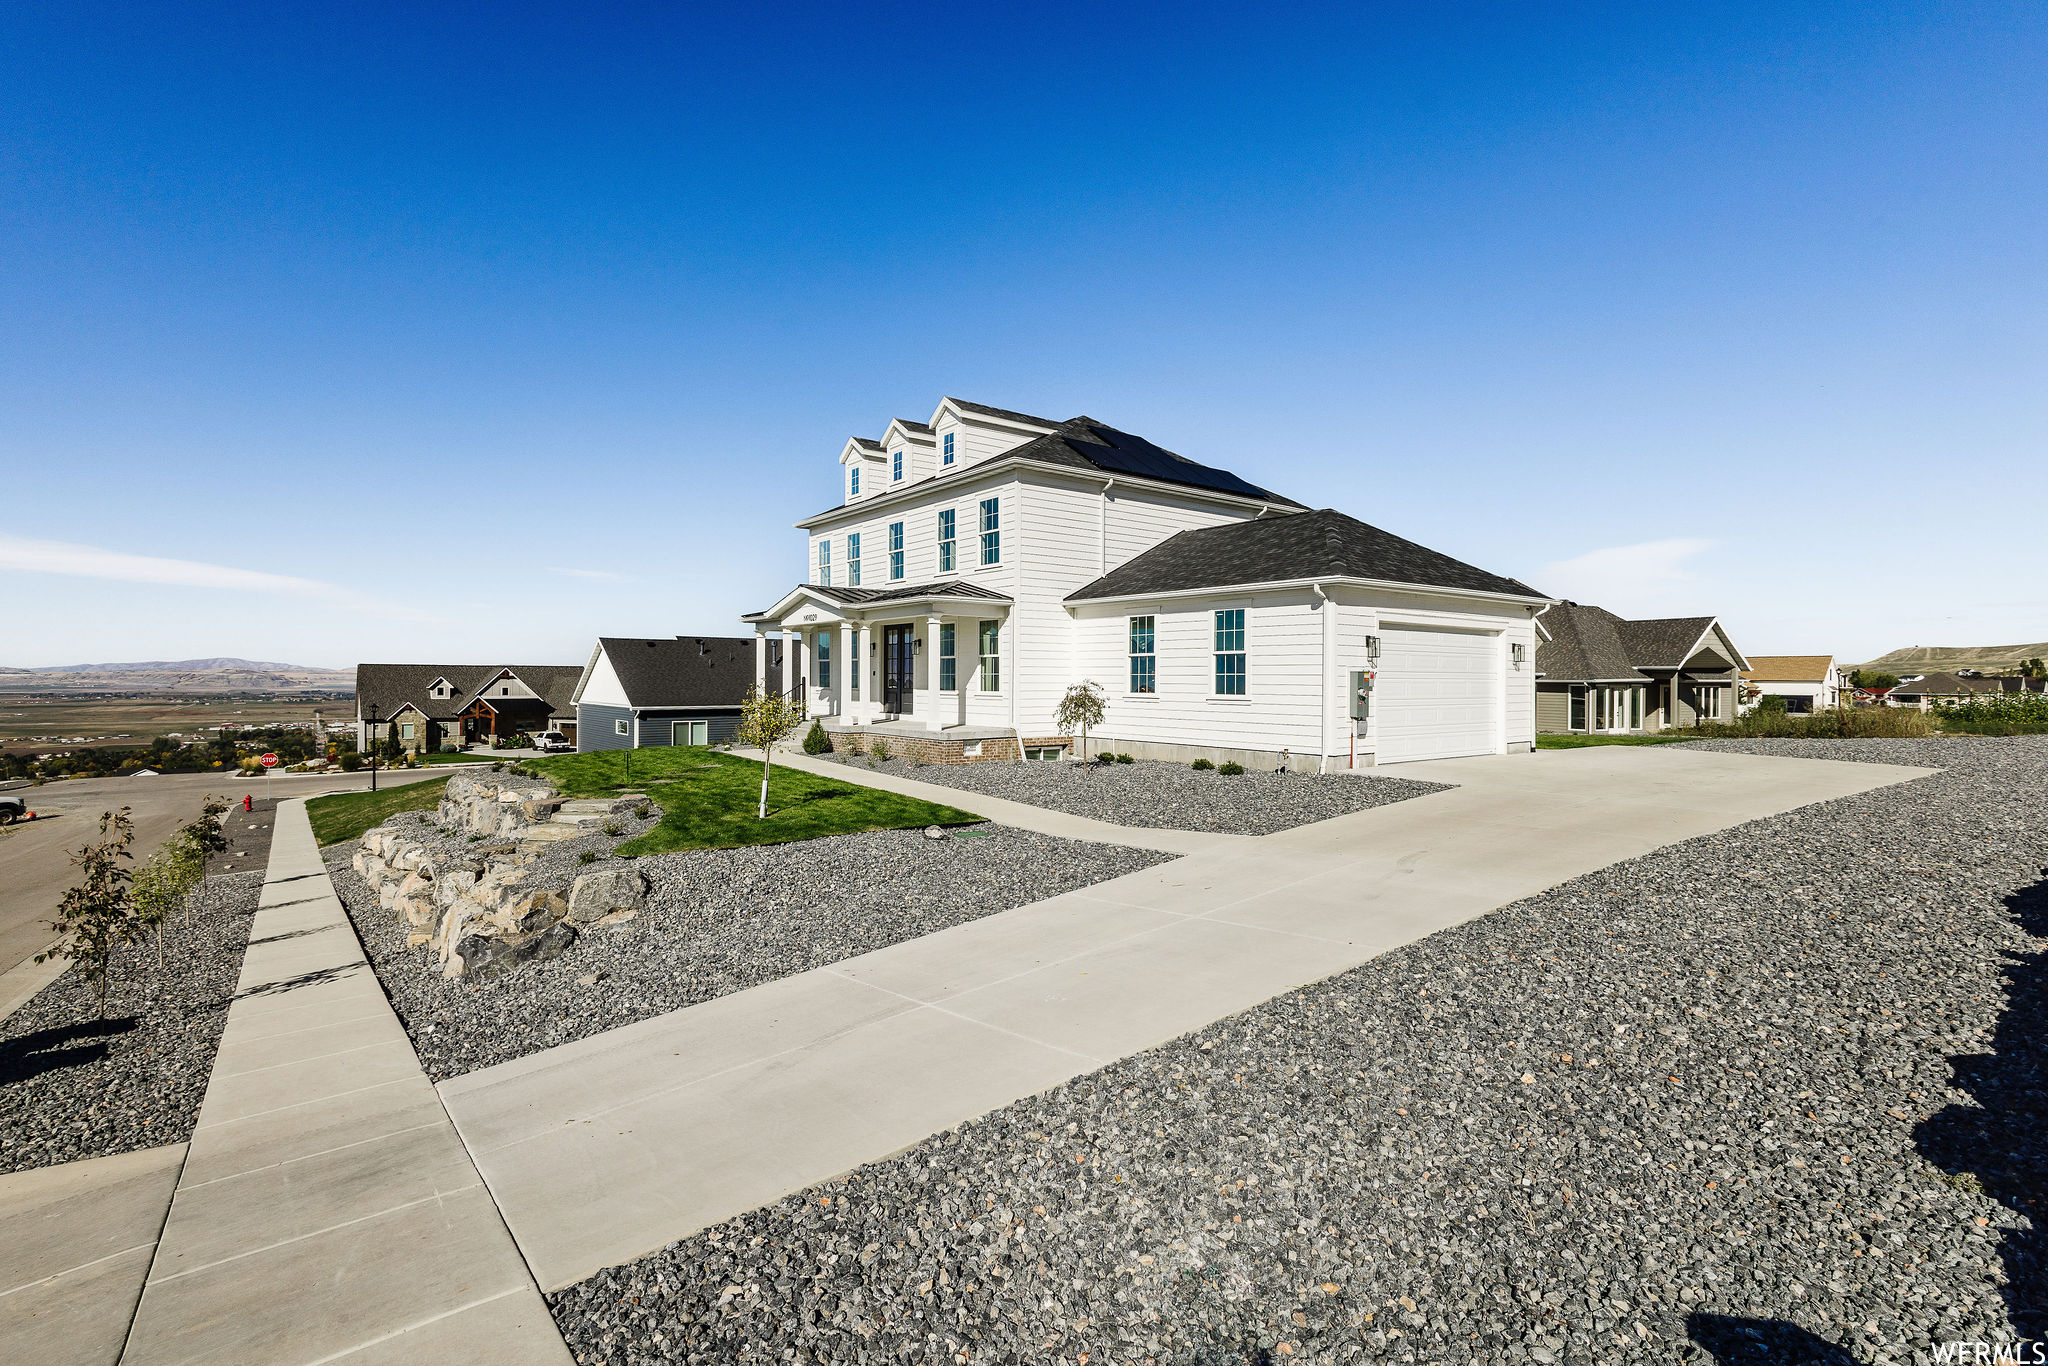 1029 E CENTER, Hyde Park, Utah 84318, 5 Bedrooms Bedrooms, 20 Rooms Rooms,3 BathroomsBathrooms,Residential,For sale,CENTER,1896606